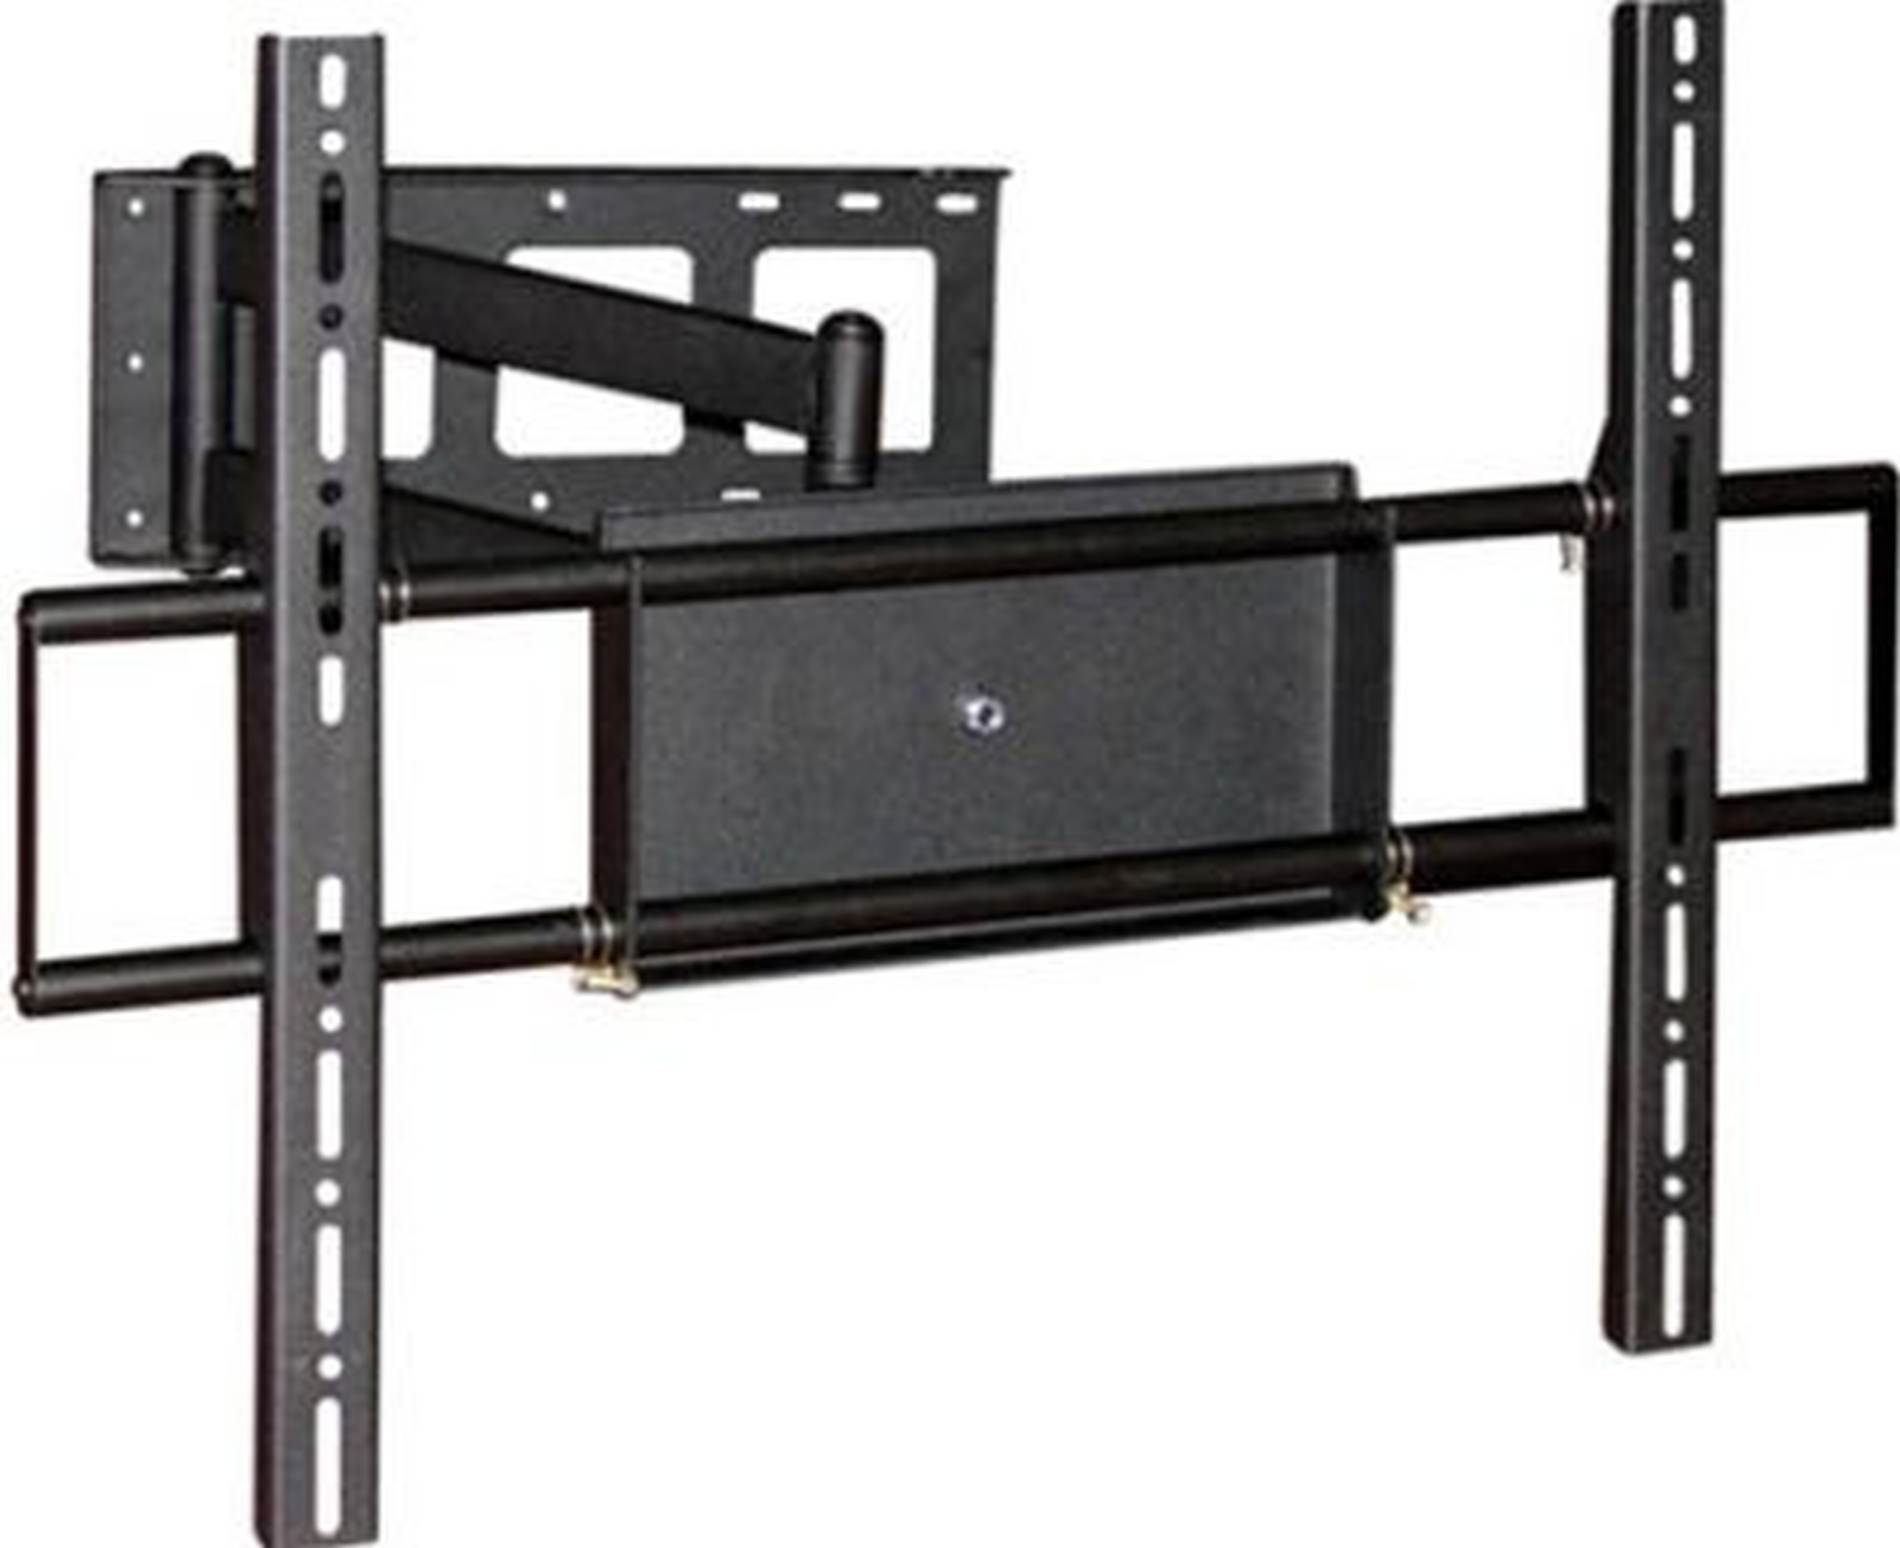 Swivel and Tilting Wall Bracket for TVs from 32 - 55 inches